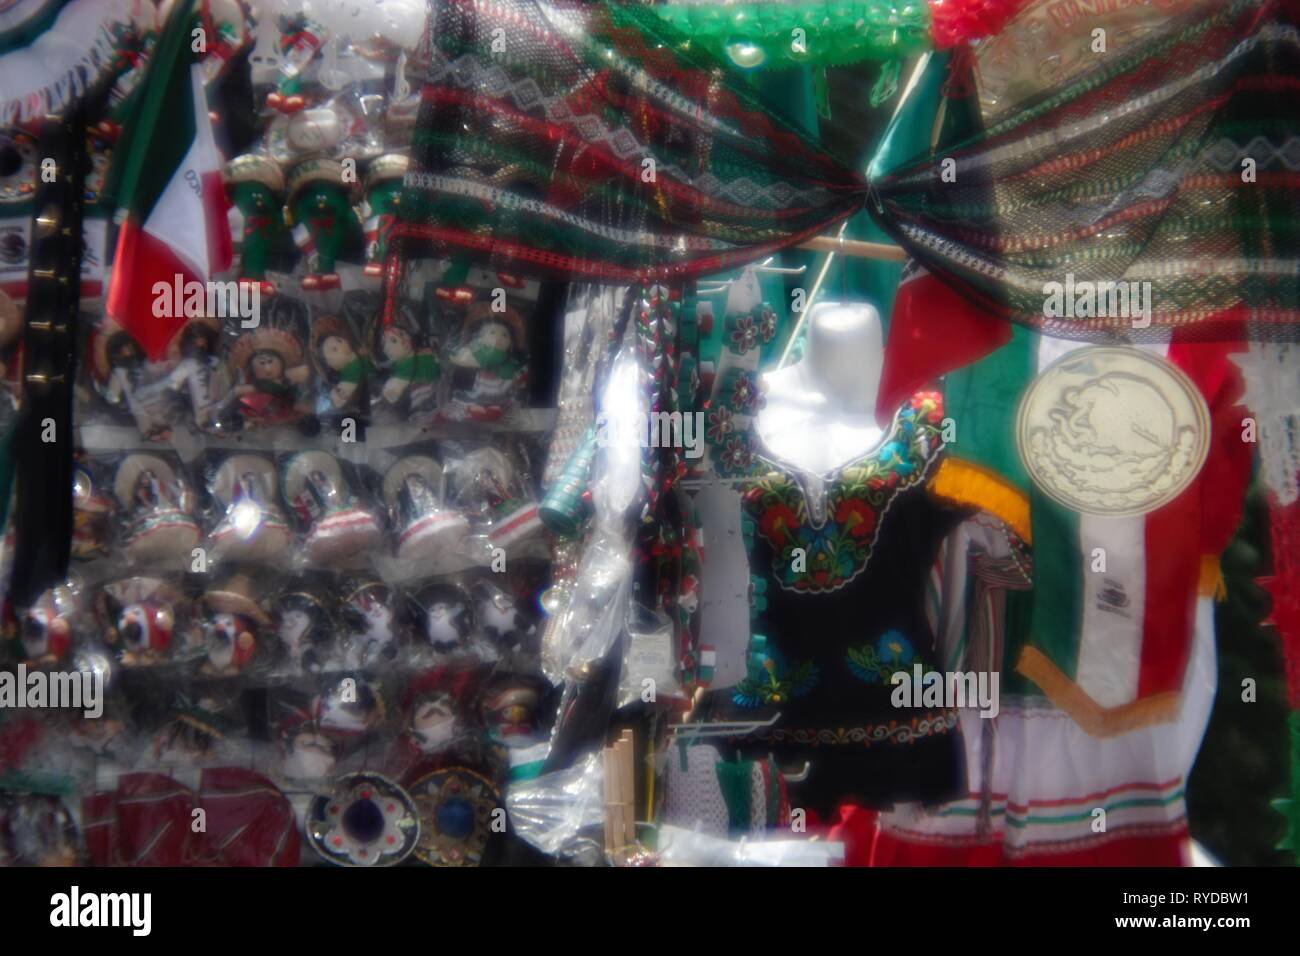 Mexico´s Independence Day´s national patriotic celebration cart souvenir selling display Stock Photo